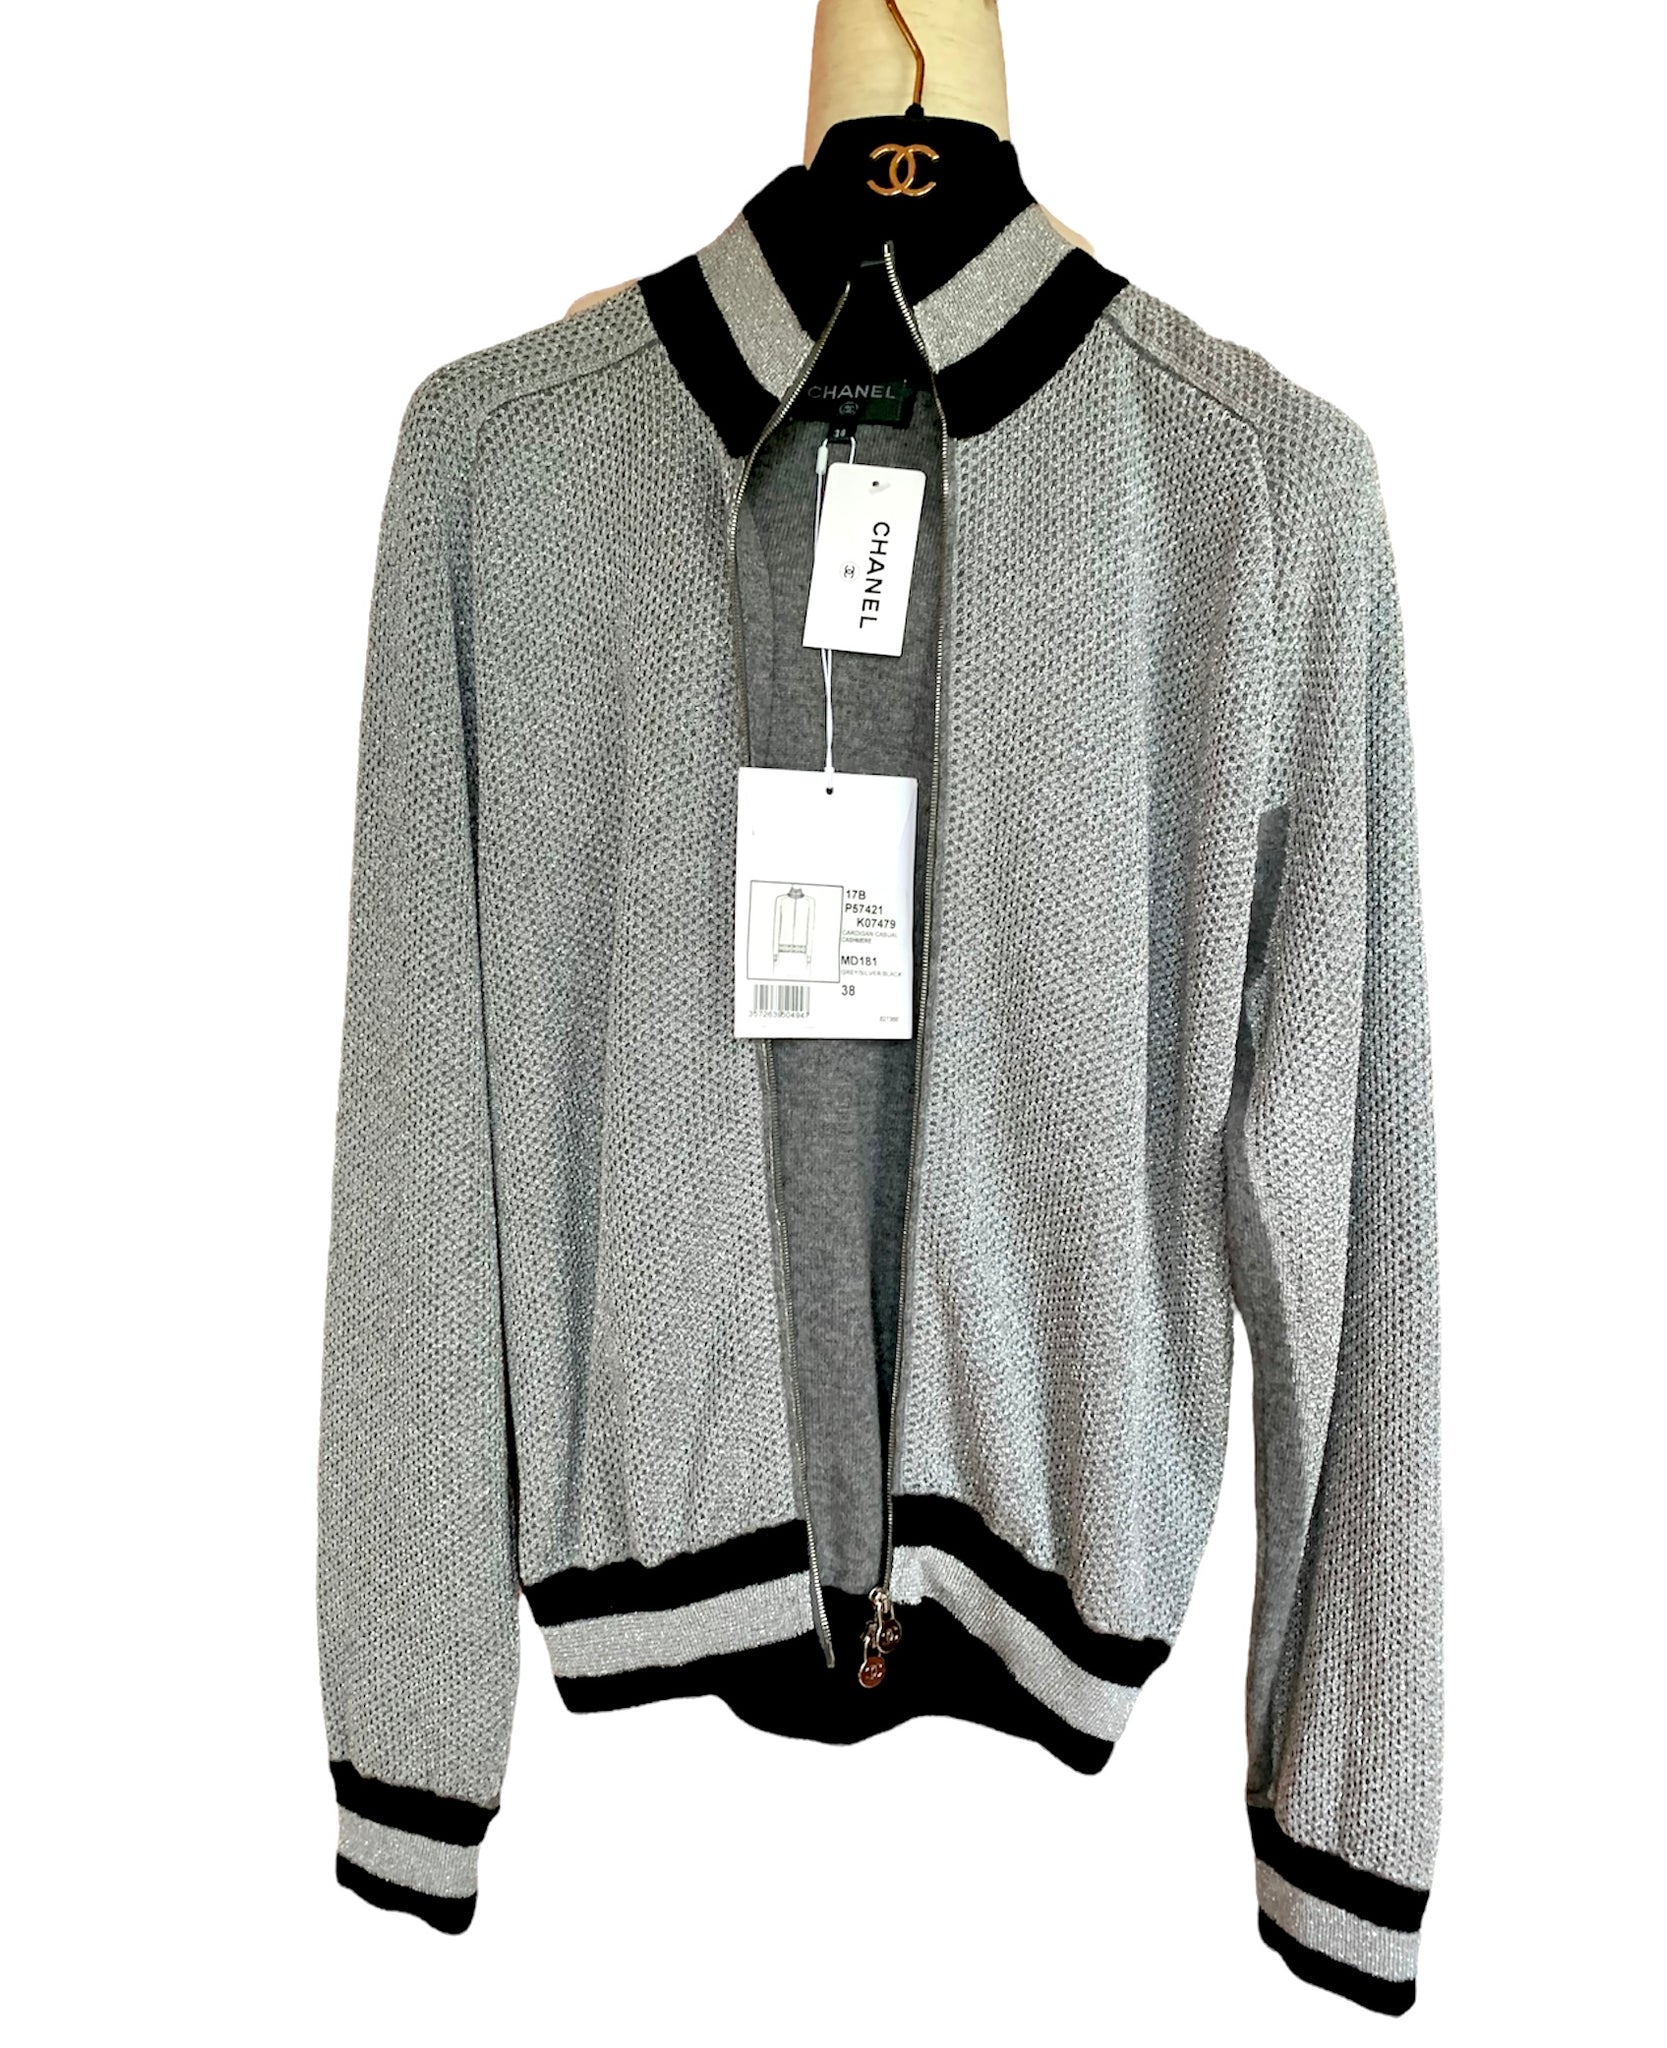 CHANEL CASHMERE BOMBER JACKET CARDIGAN HOODIE NEW WITH TAGS Retail $ 4 –  The Paris Mademoiselle